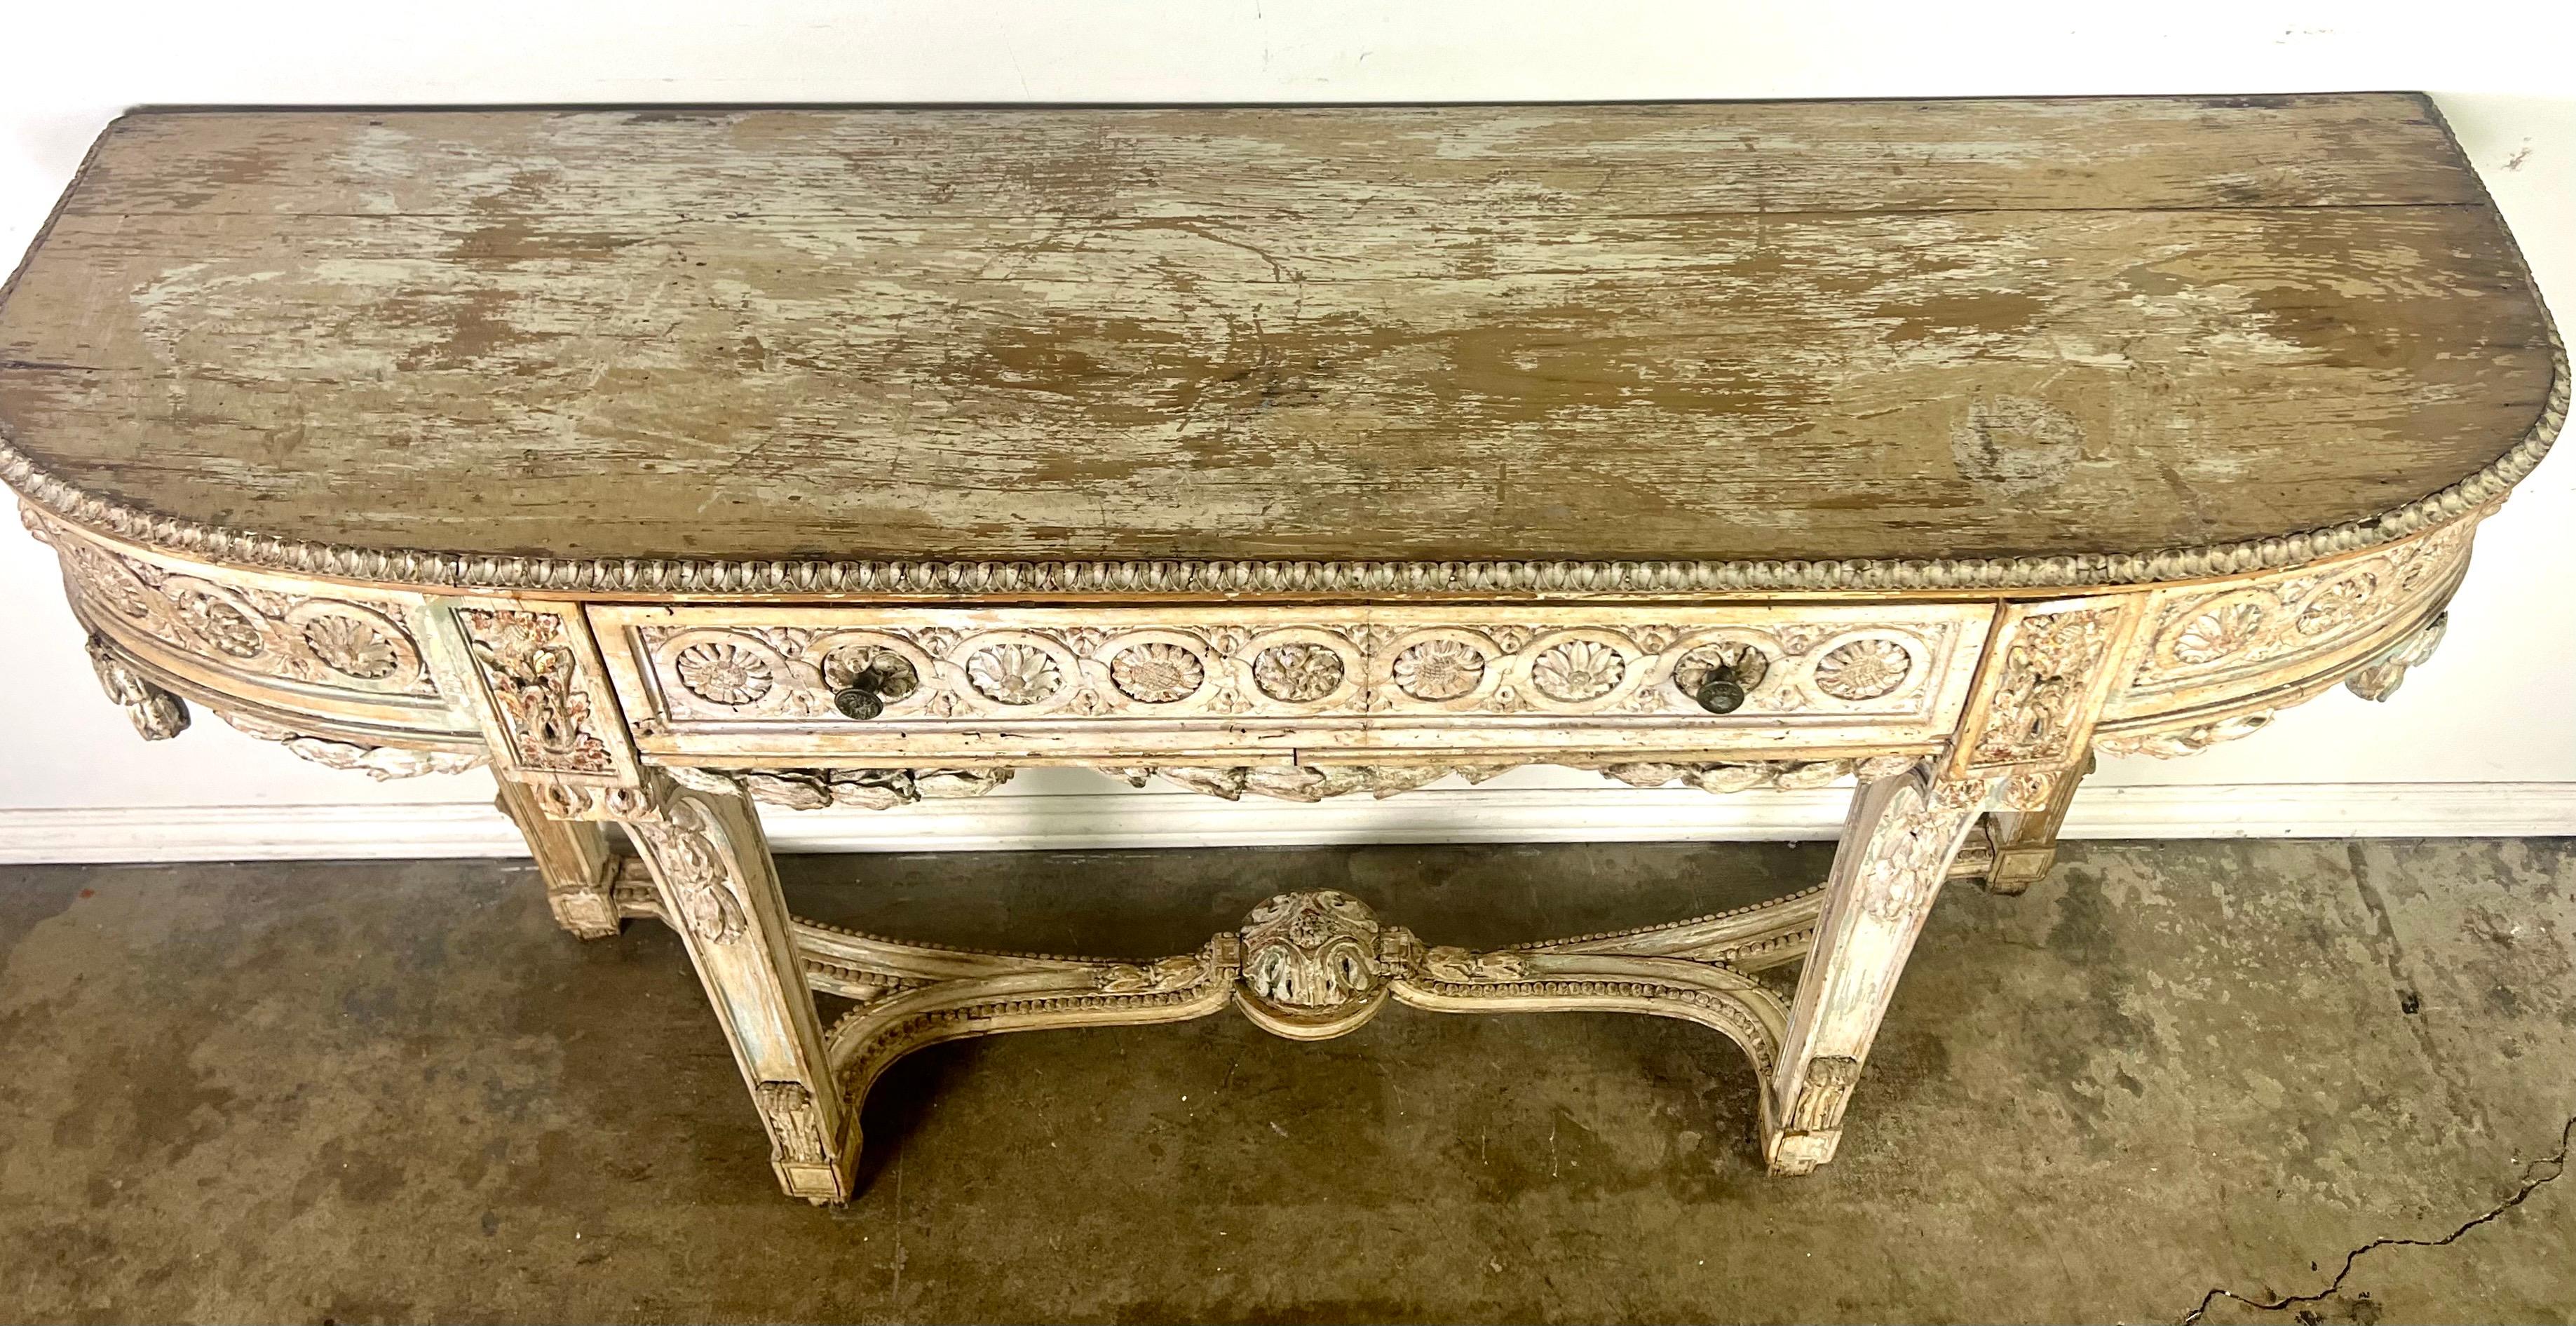 19th century French provincial painted console with hand-carved intricate detailing of garlands, rosettes, and laurel leaf designs. The four carved legs connected by a center stretcher with a cartouche provide both stability and aesthetic appeal. 